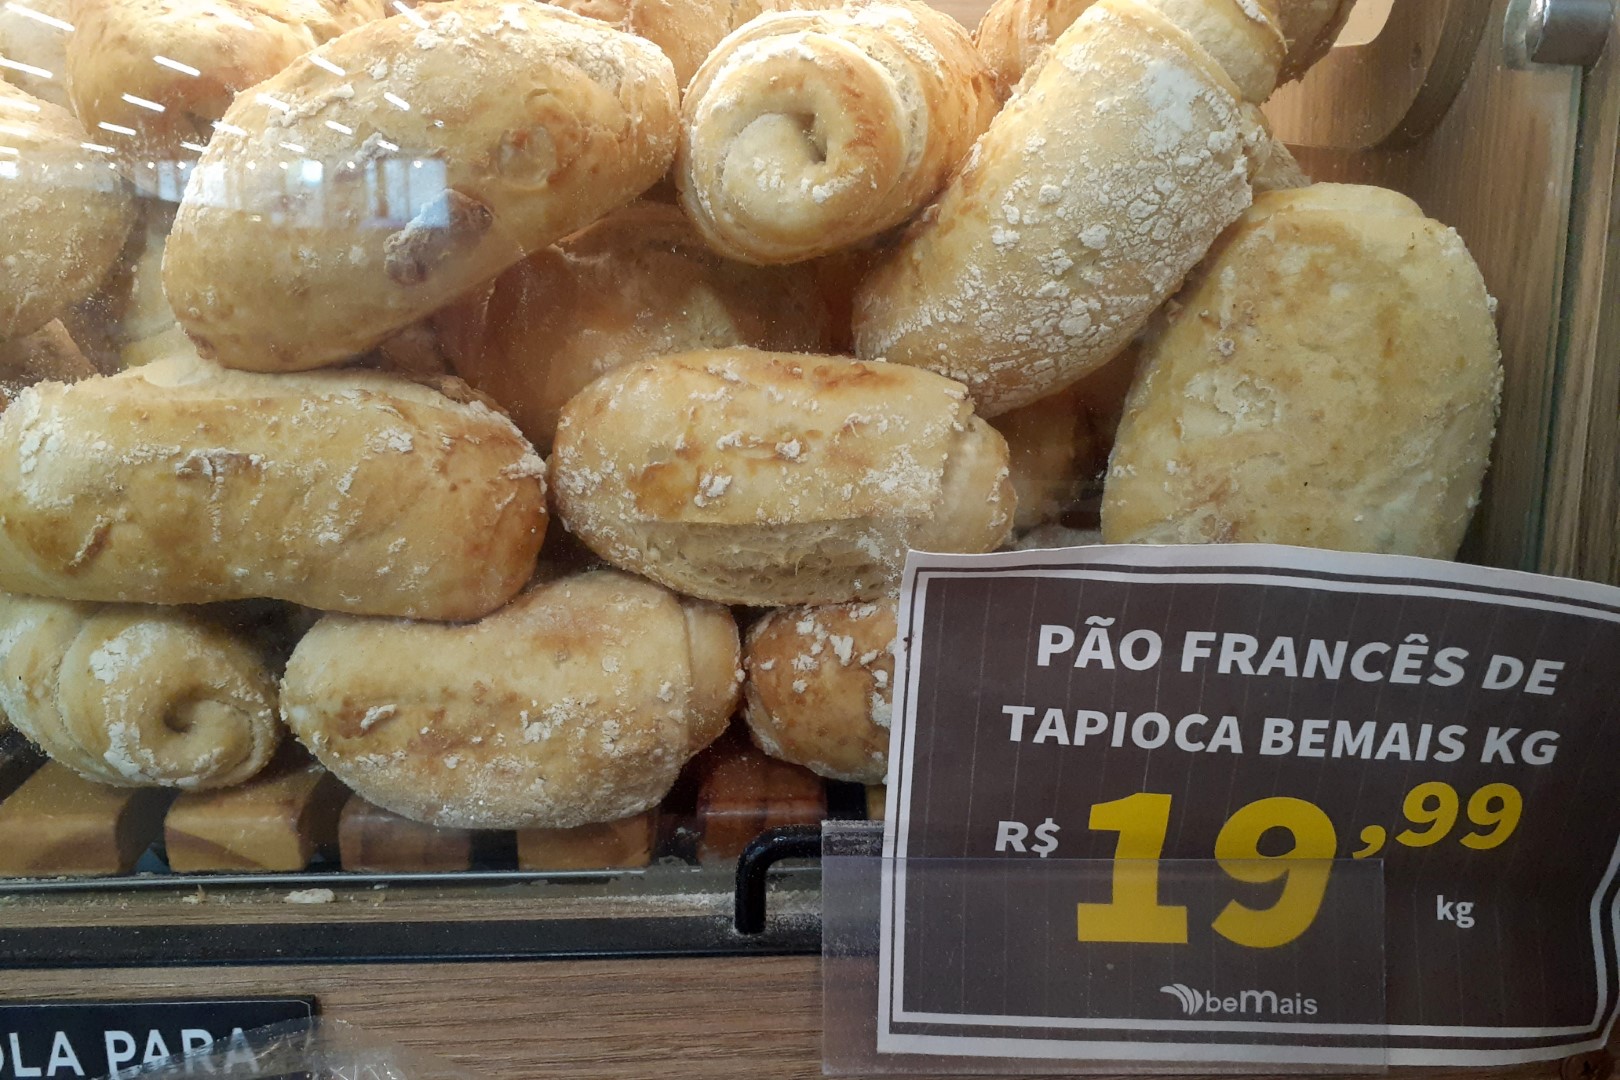 Even French bread is made with tapioca...